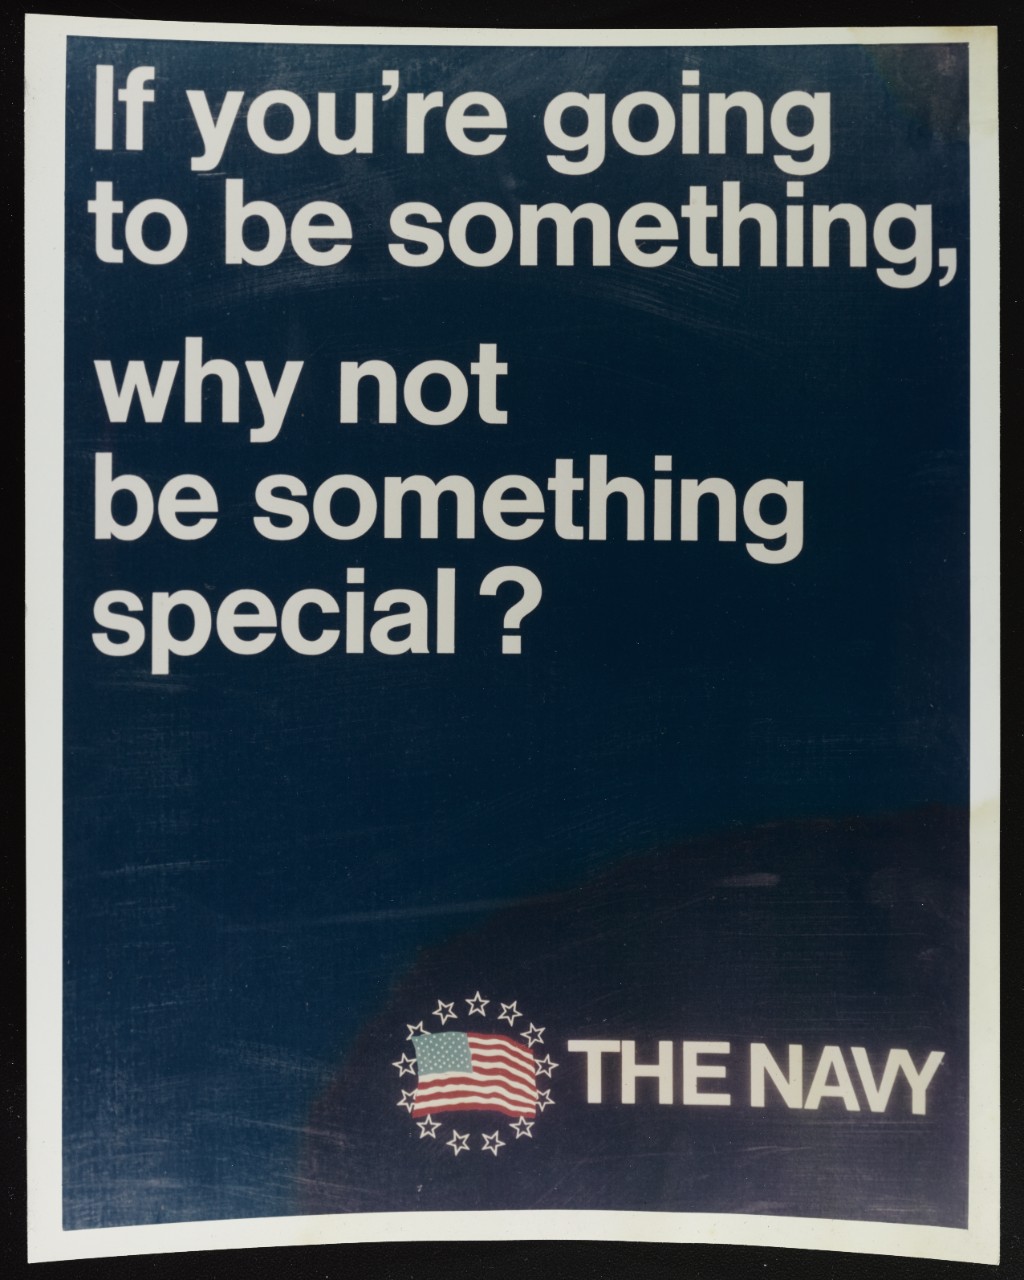 Recruiting poster:  If you're going to be something, why not be something special?